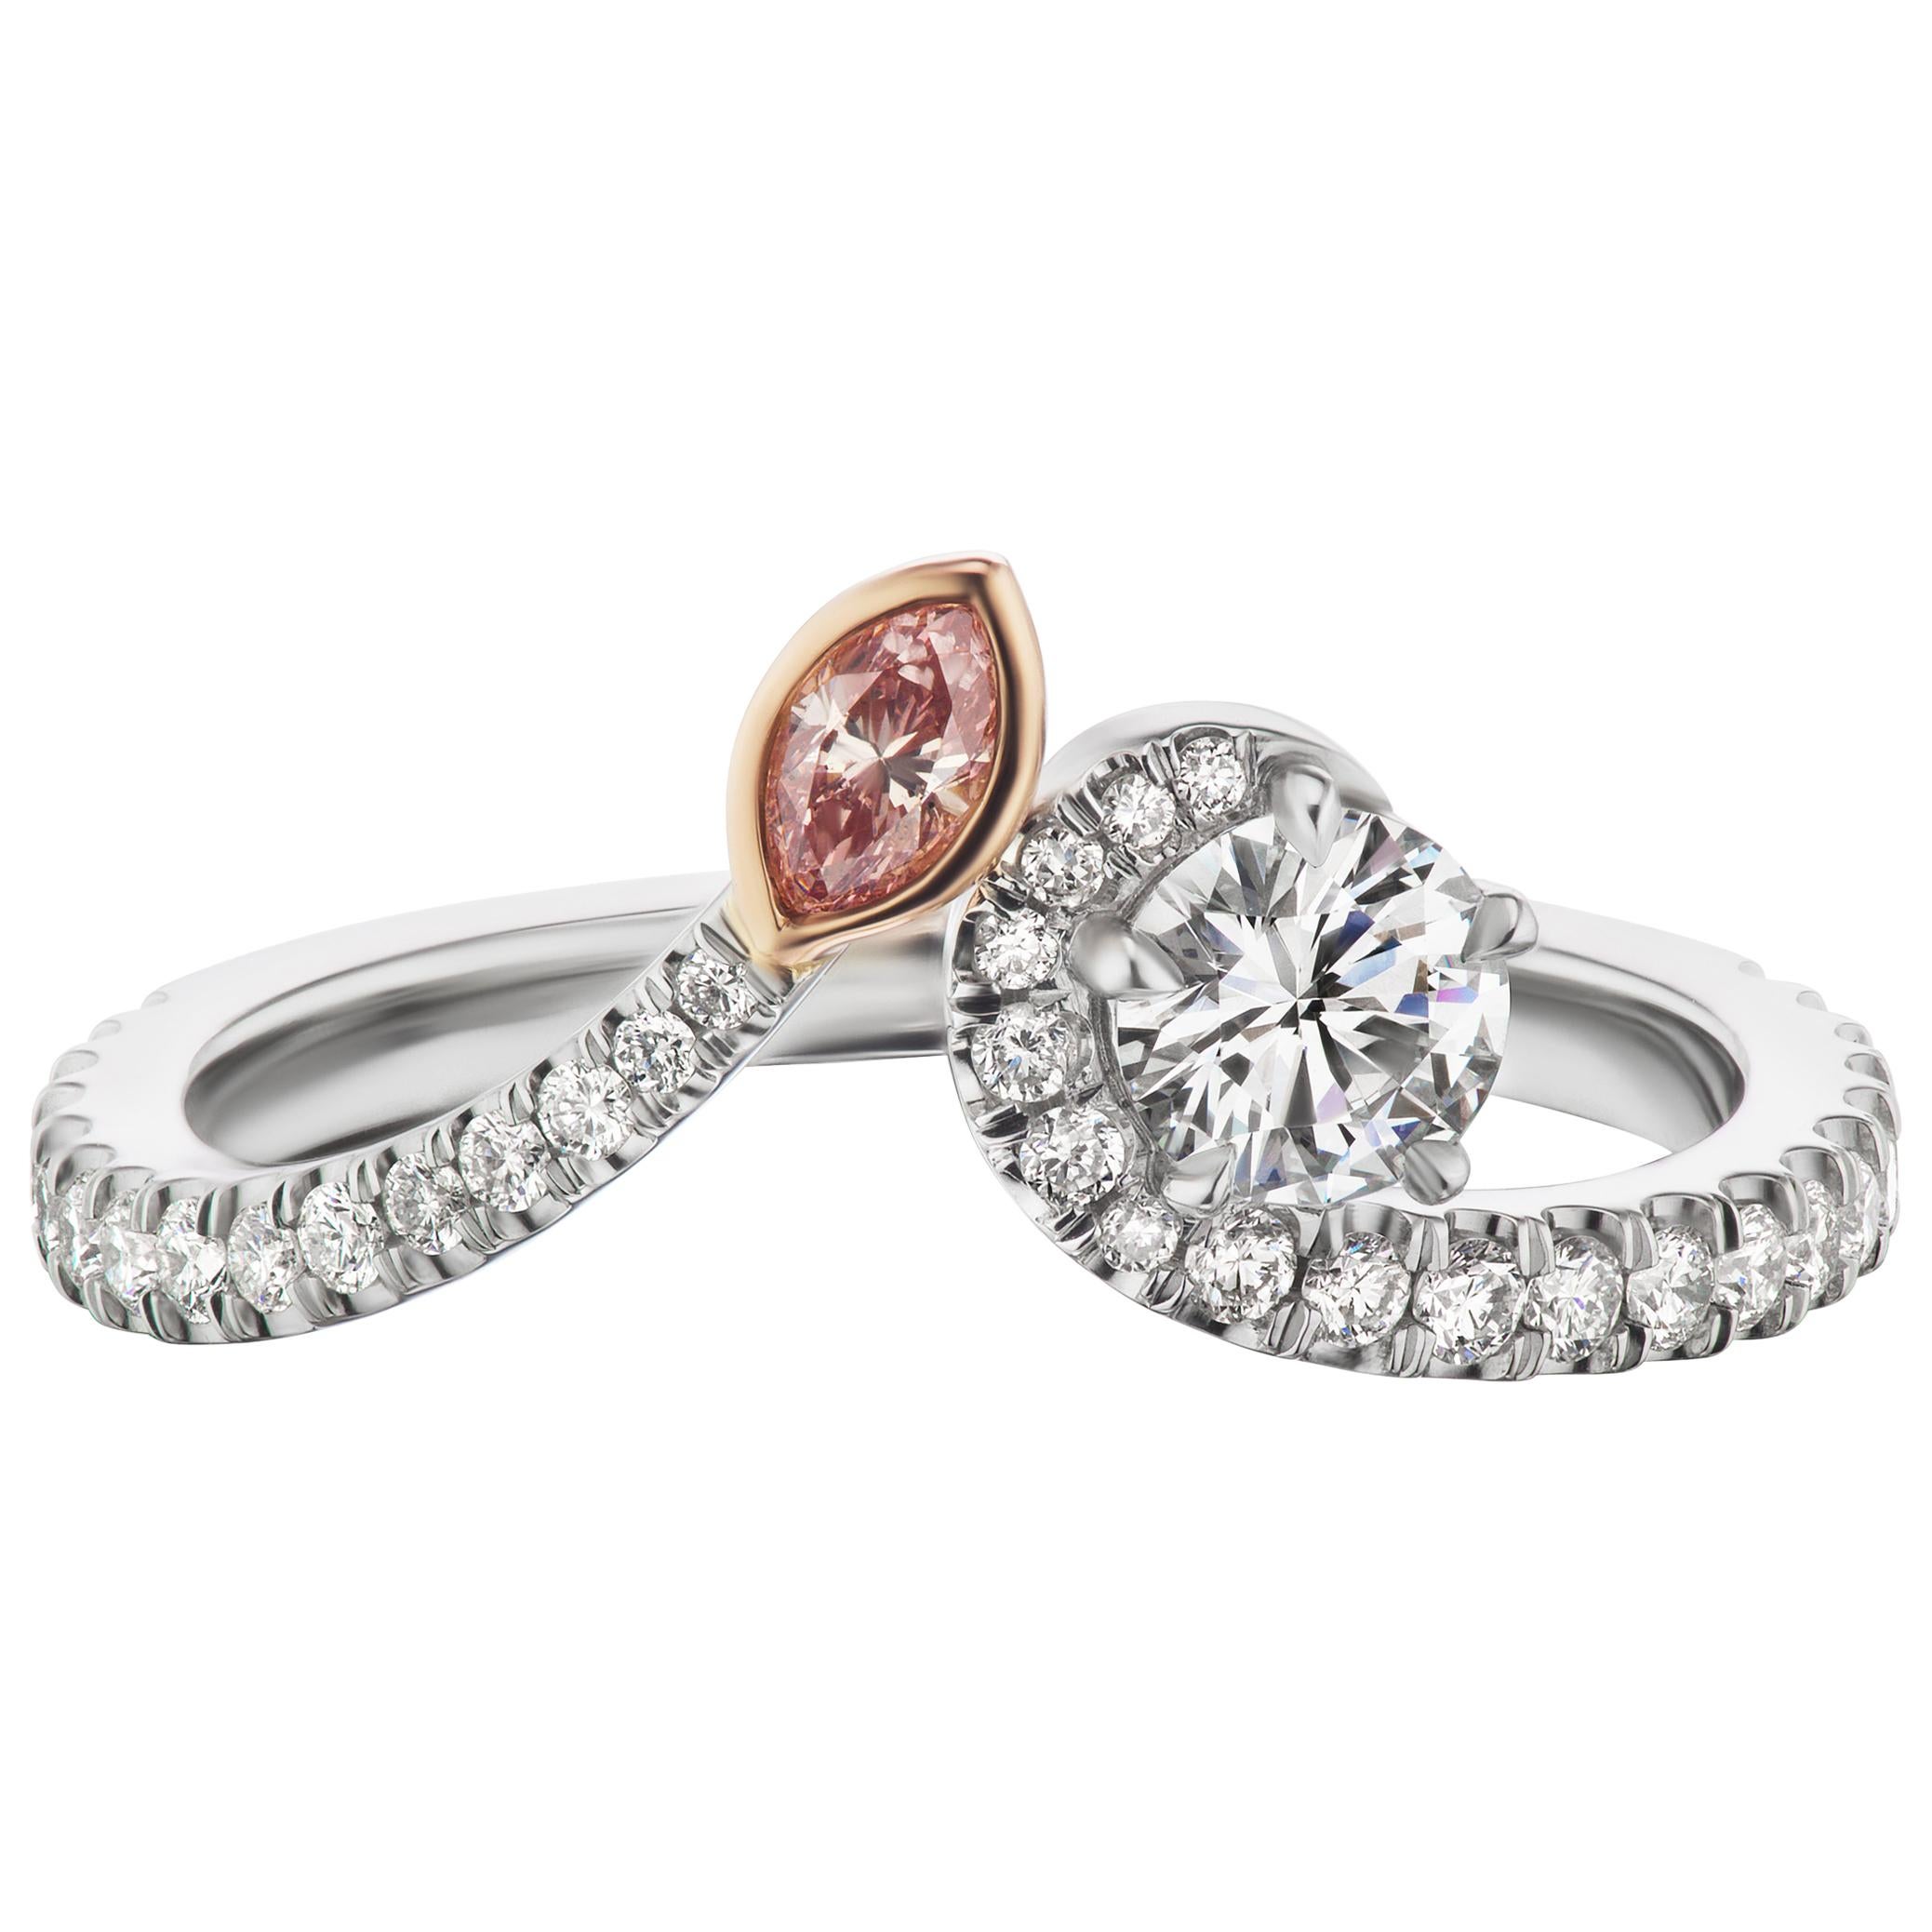 GIA Certified 0.30 D VVS1 and Certified Pink Diamond Bypass Handmade Ring